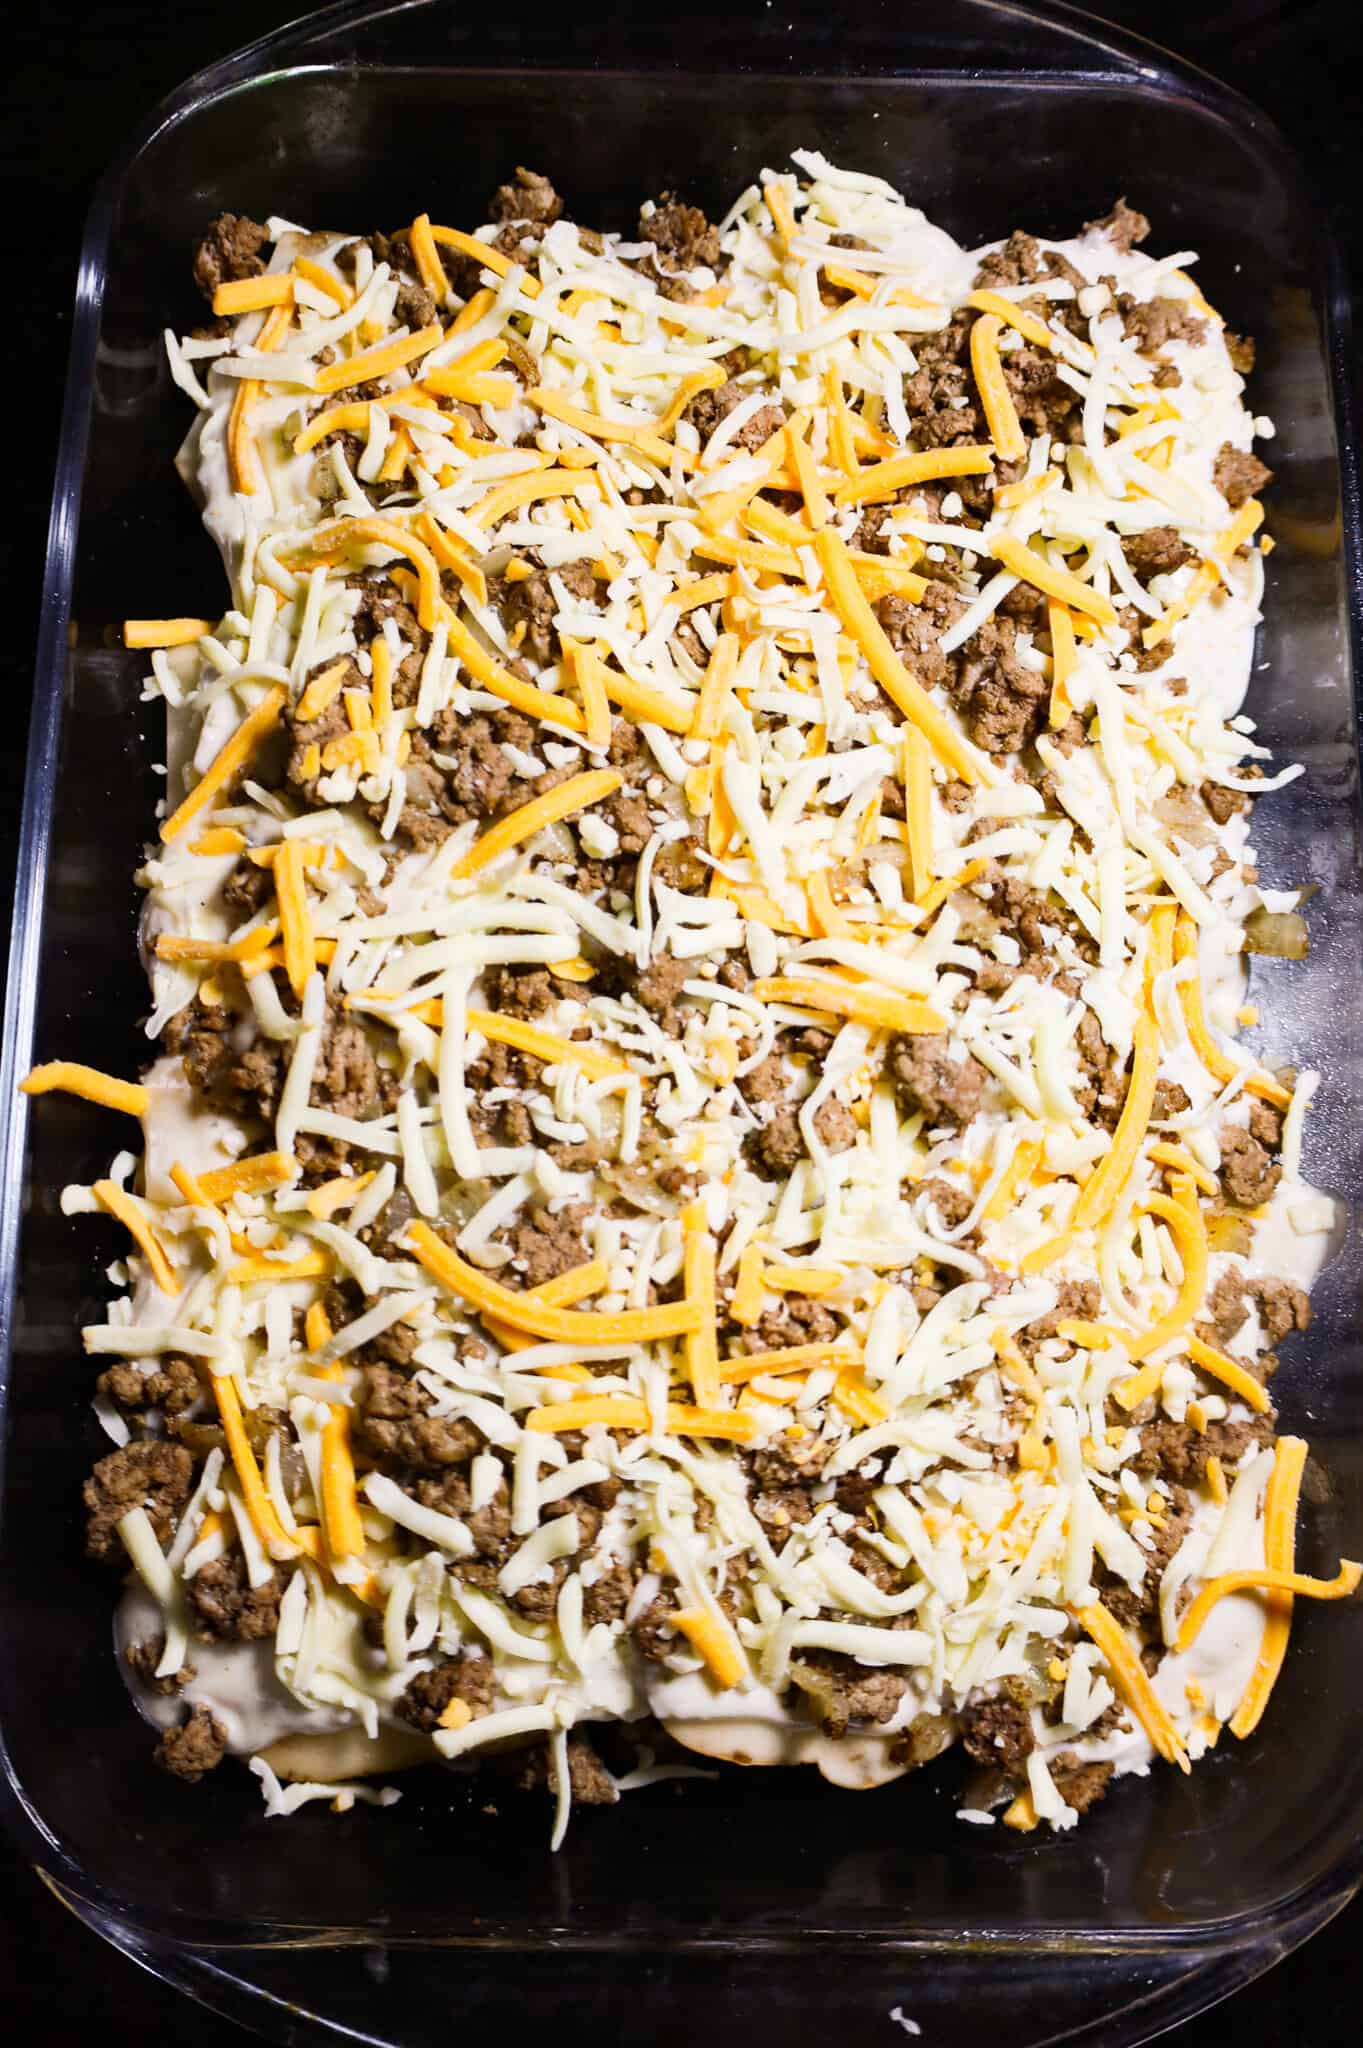 shredded cheese and crumbled ground beef on top of potatoes in a baking dish